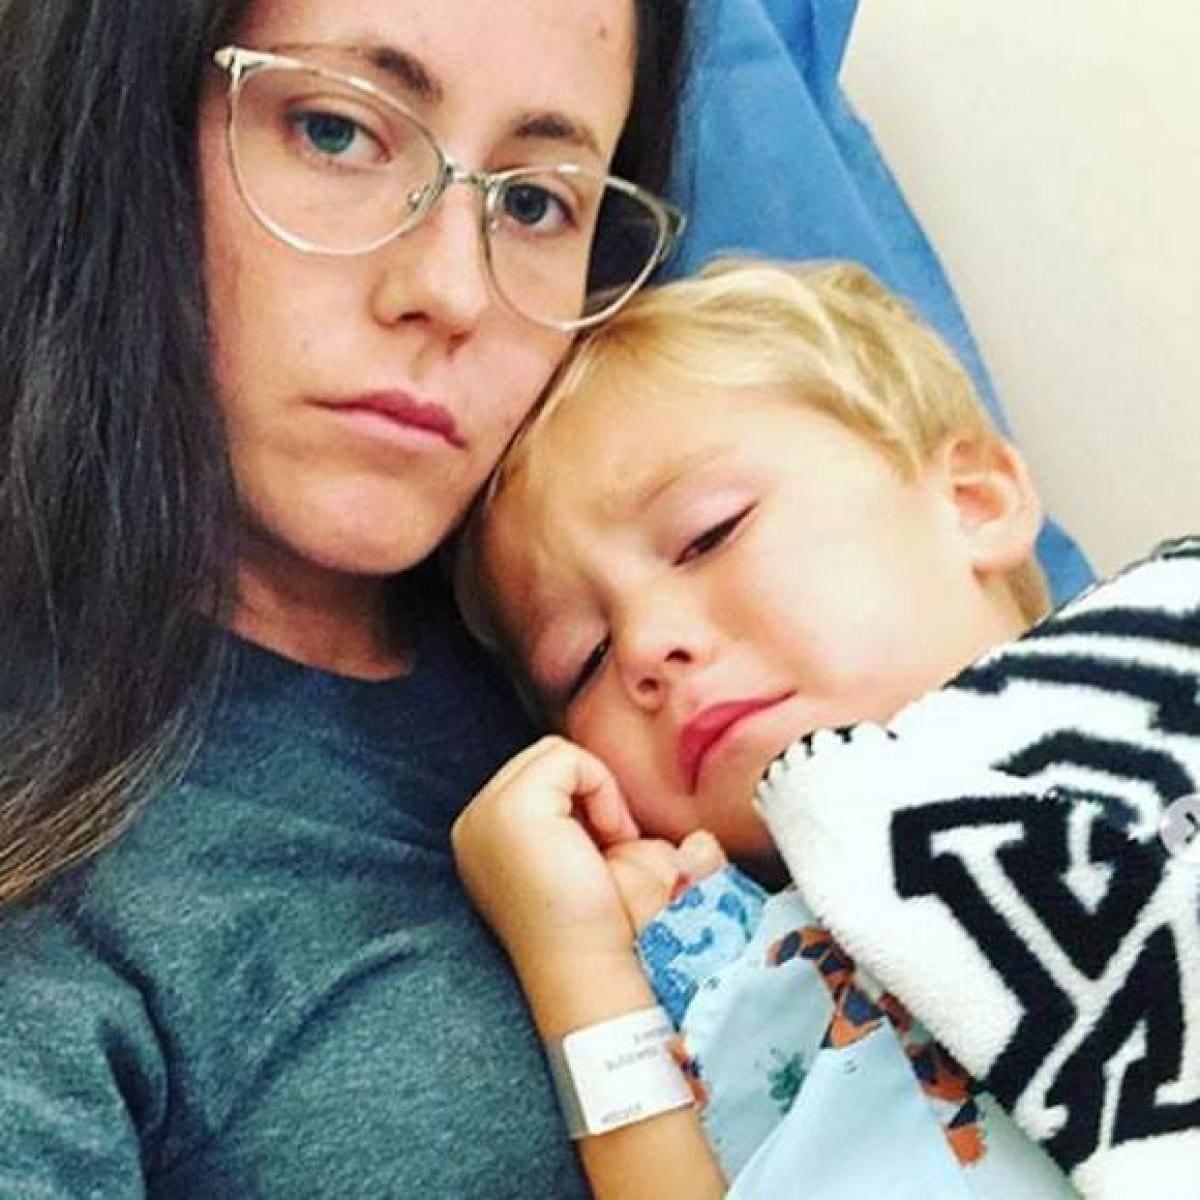 ”jenelle-evans-gets-to-see-her-kids-again-and-celebrate-kaisers-5th-birthday-check-out-the-cute-pics”